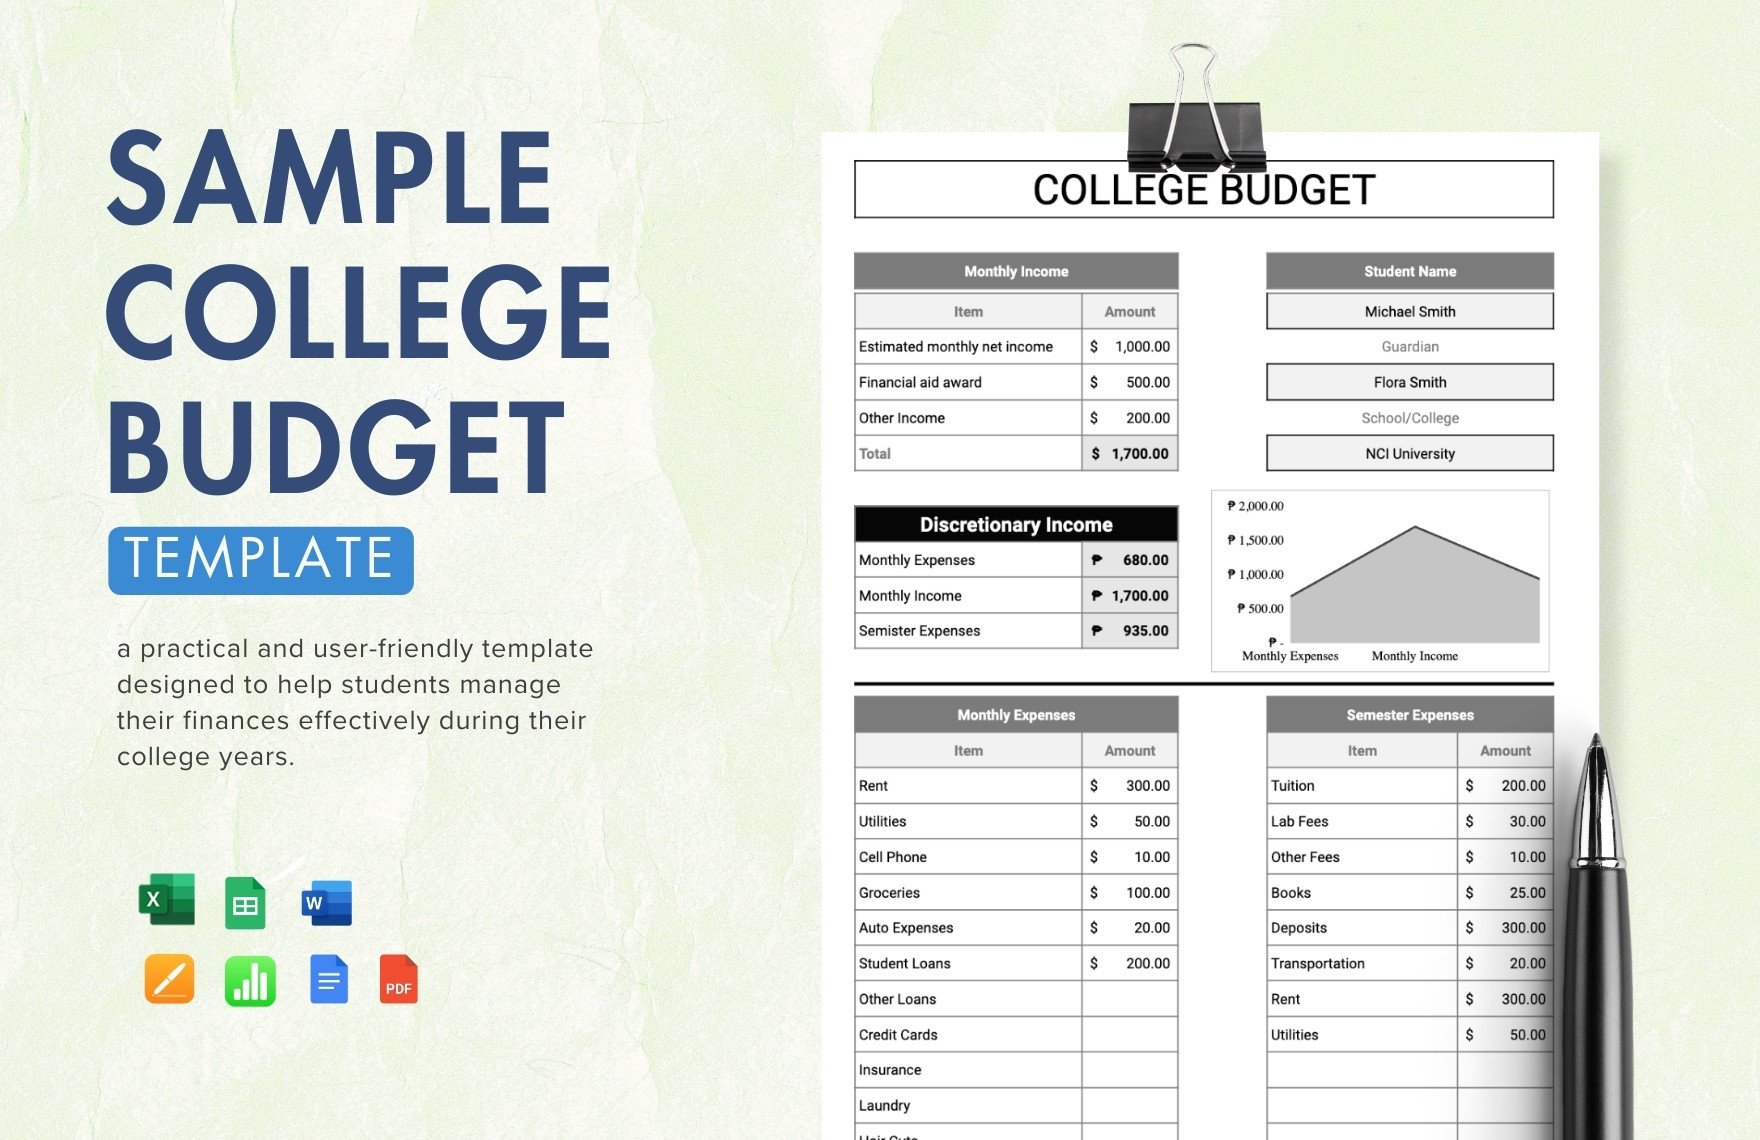 Sample College Budget Template in Word, Google Docs, Excel, PDF, Google Sheets, Apple Pages, Apple Numbers